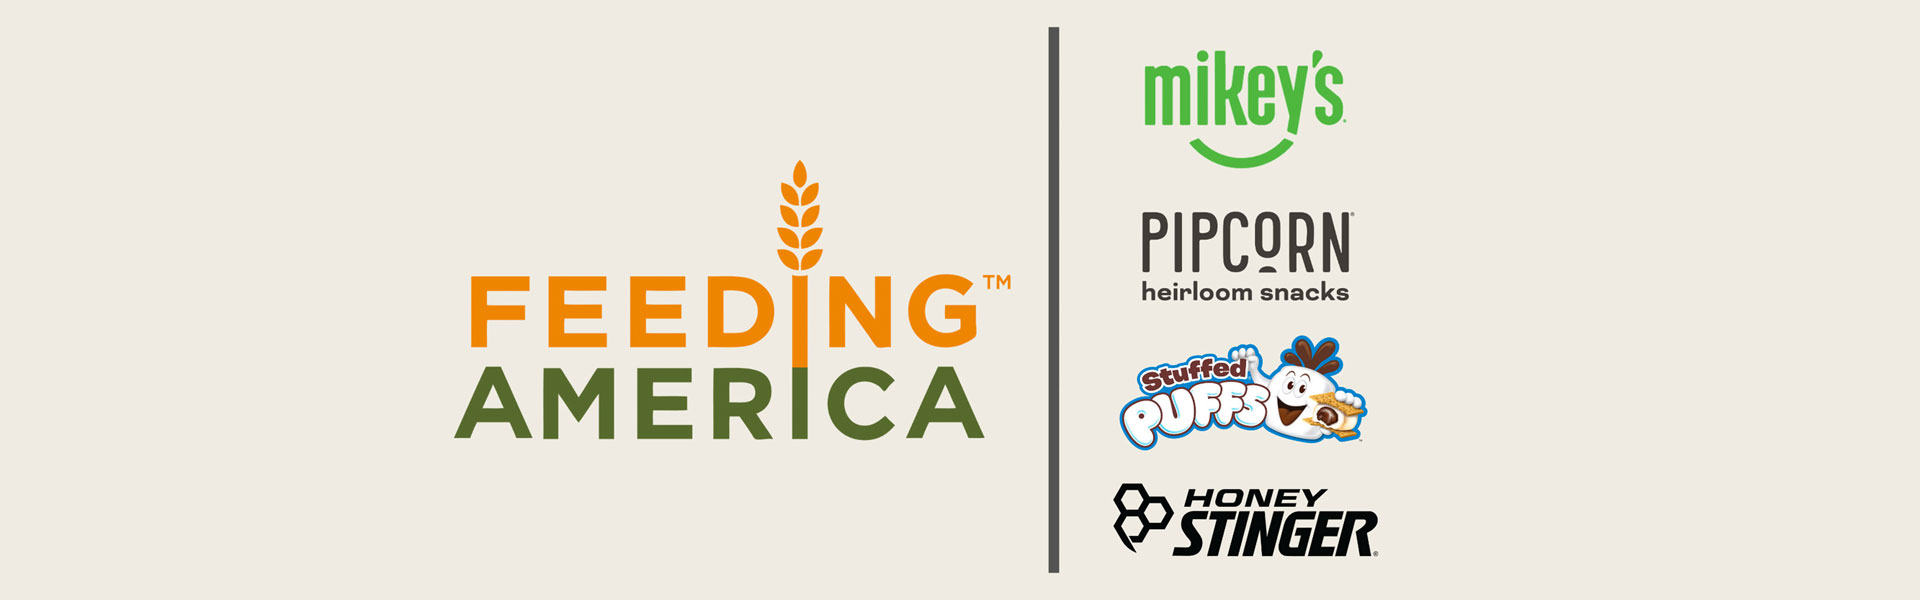 Factory Brand Partners Join Forces to Donate 1 Million Meals Through Feeding America